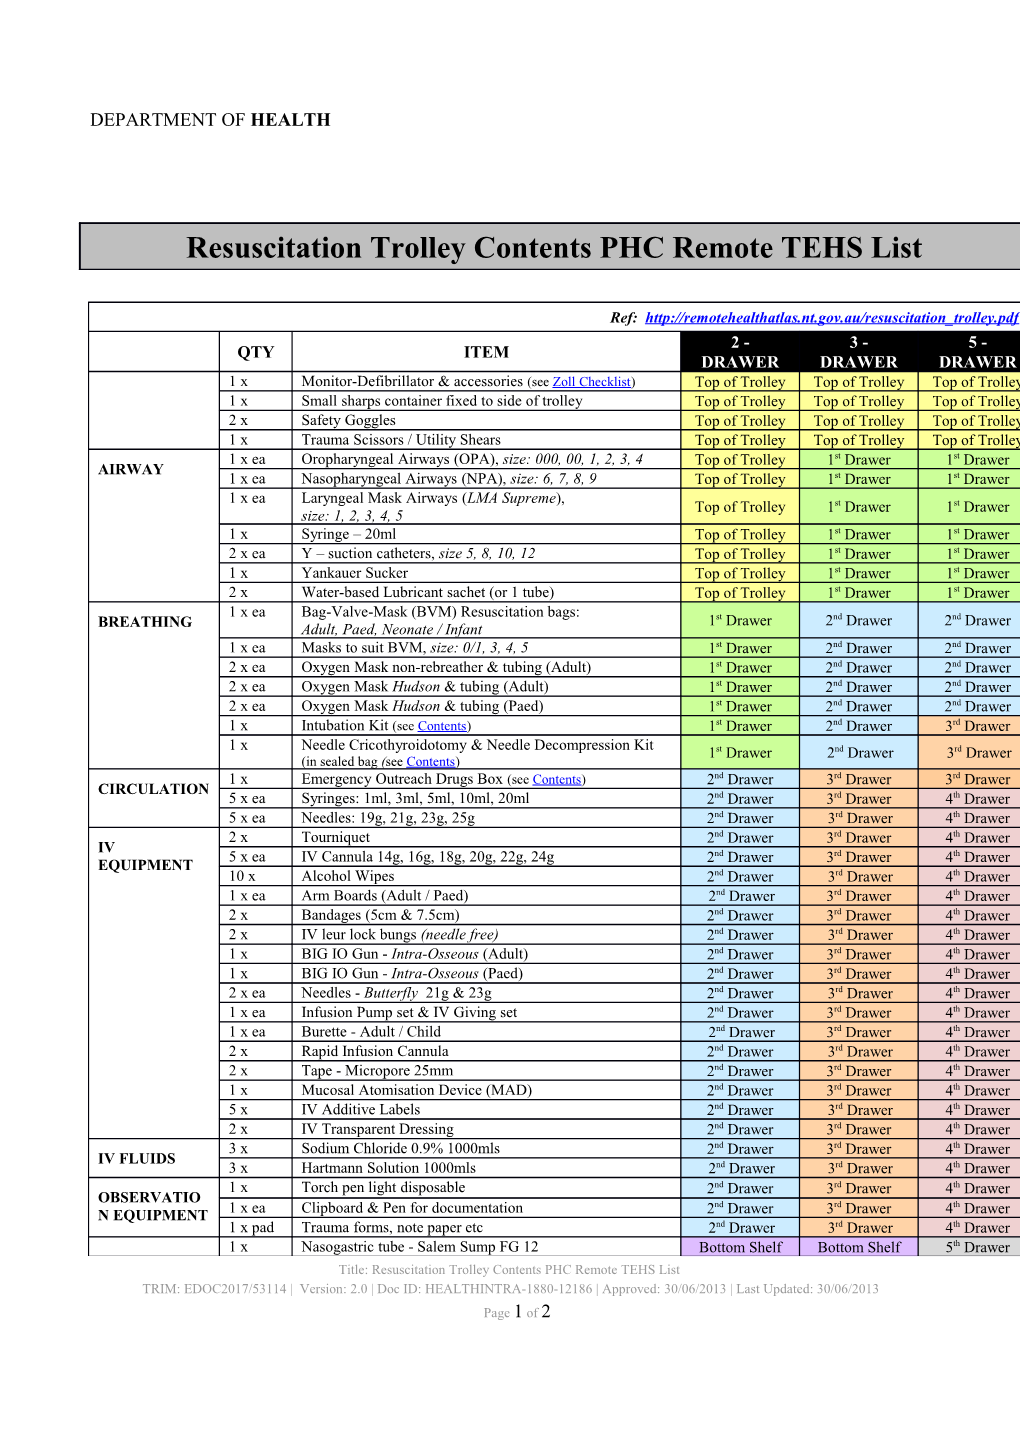 Resuscitation Trolley Contents PHC Remote TEHS List